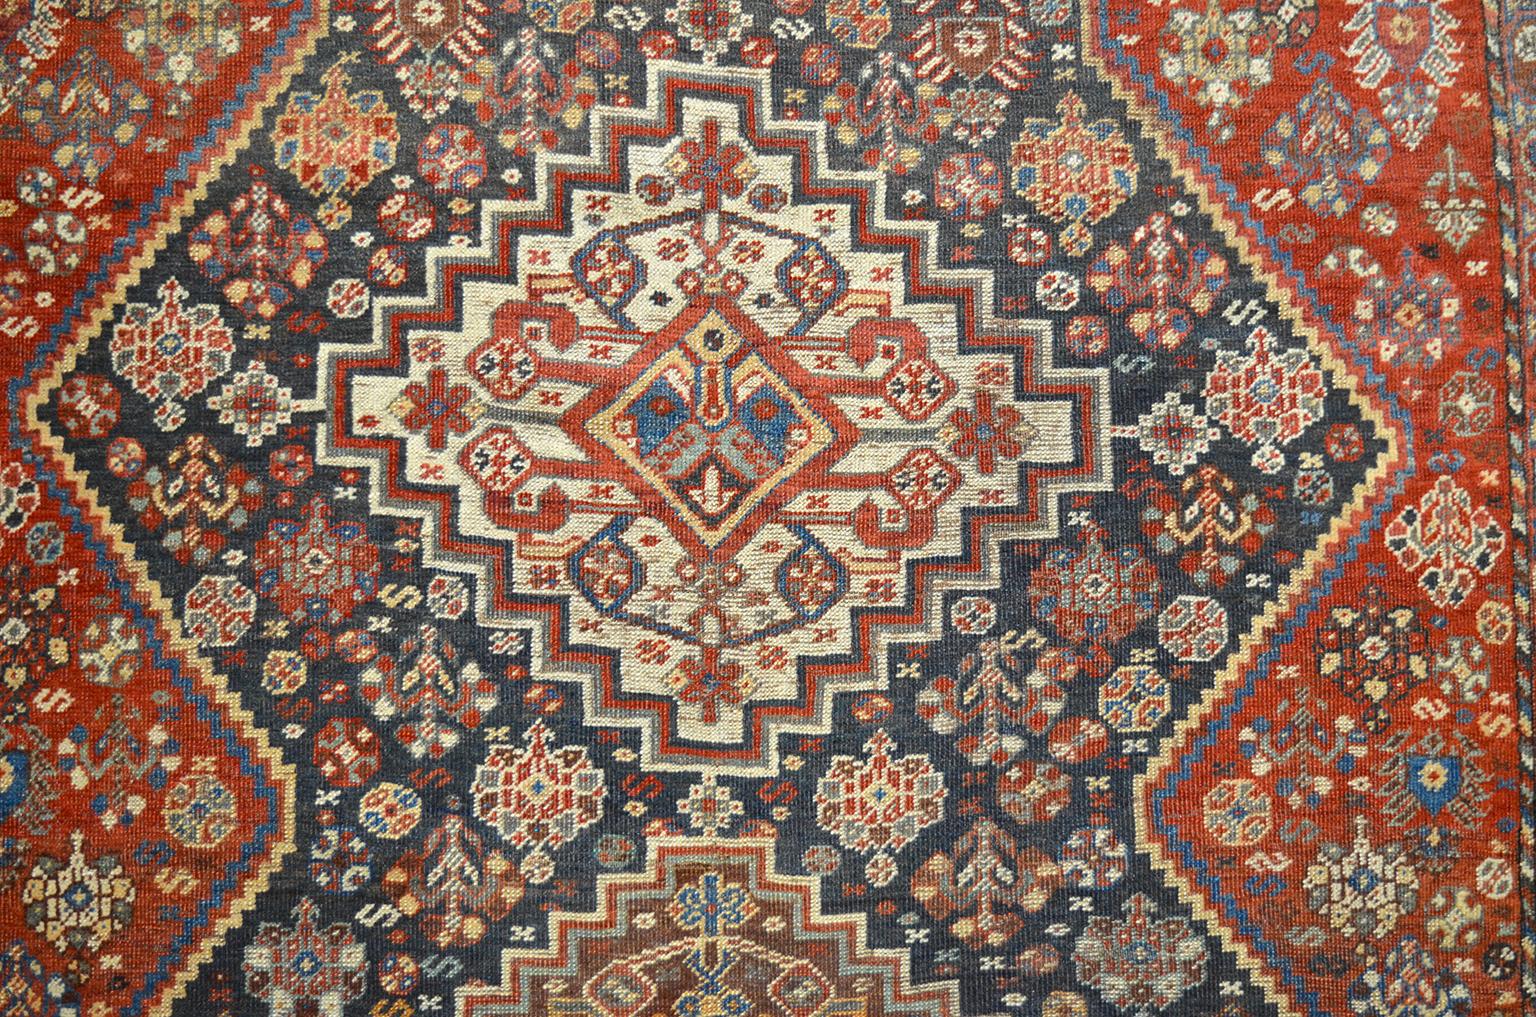 Vegetable Dyed Antique 1880s Persian Qashqai Rug, Wool, Orange, Cream, Blue, 5' x 6' For Sale